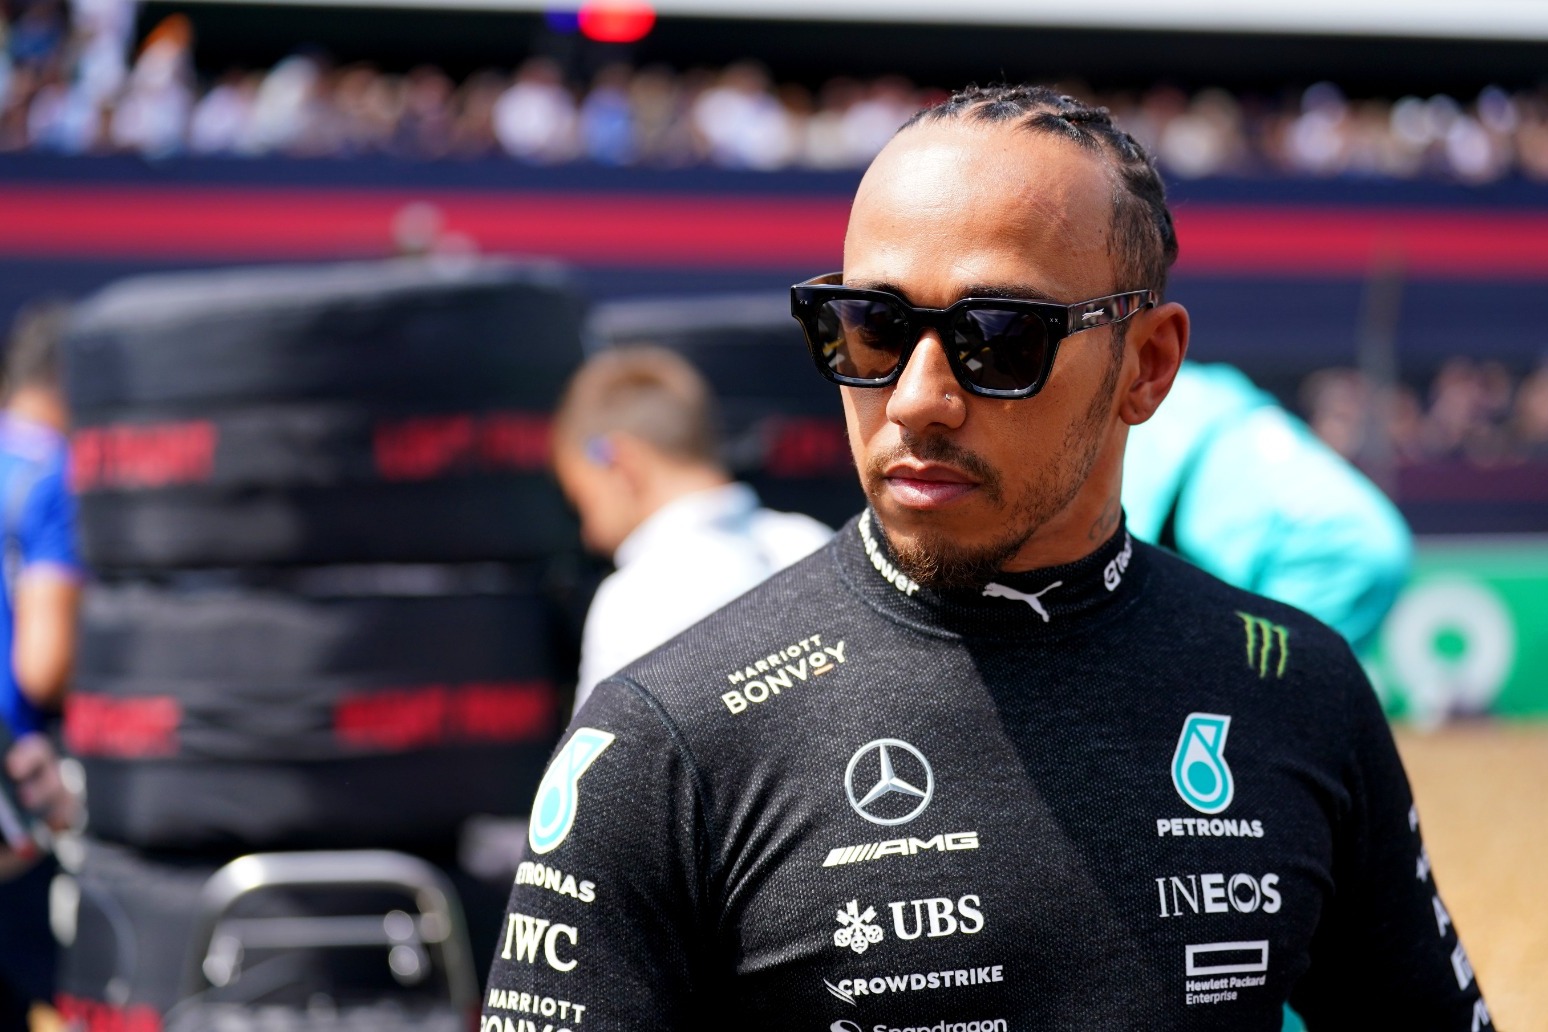 Lewis Hamilton disqualified after finishing second in US Grand Prix 